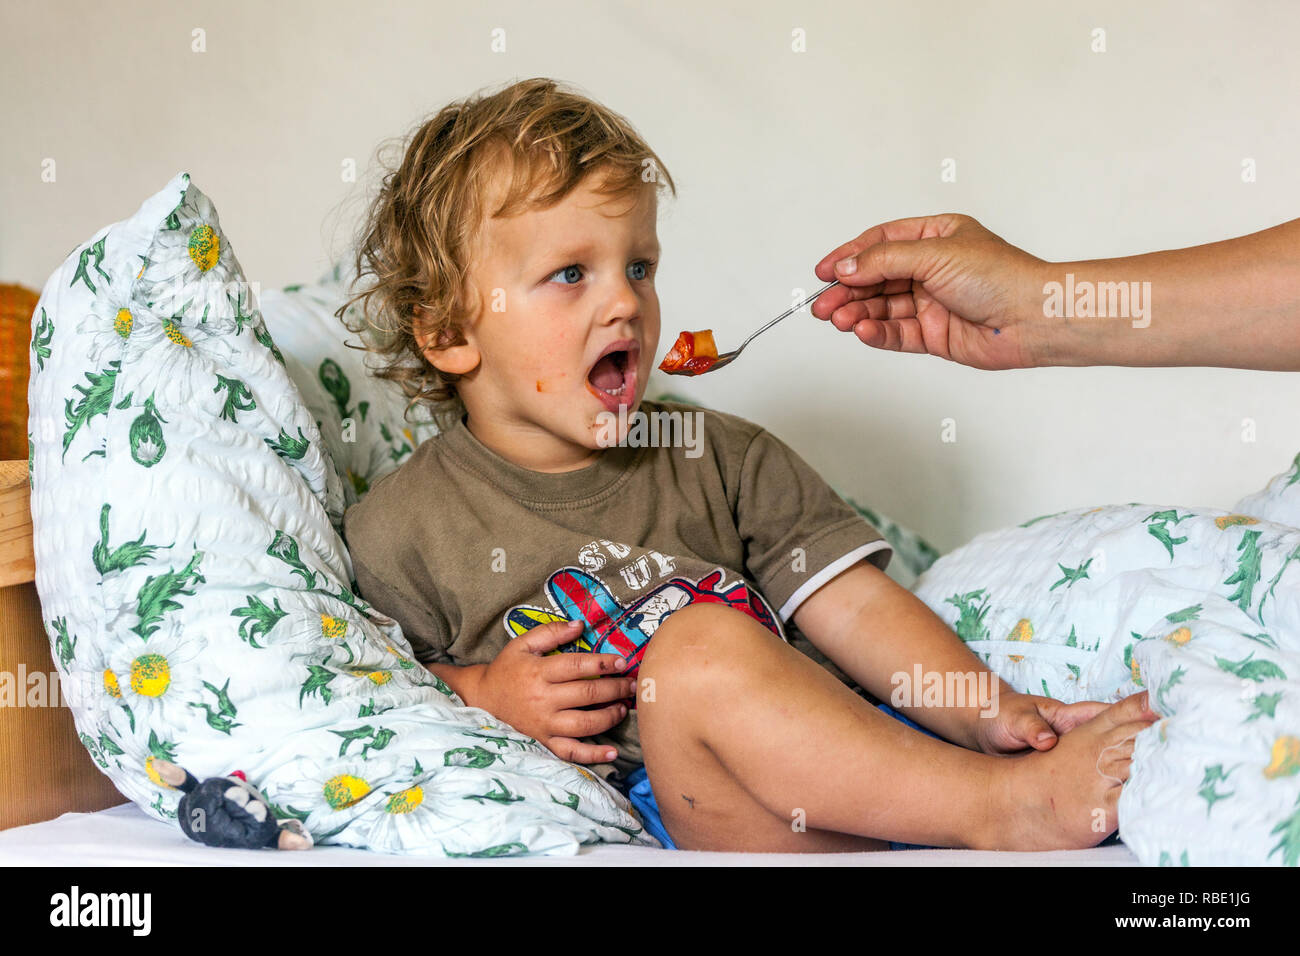 Young boy, toddler eating in bed, spoon feeding child, people feeding people Stock Photo